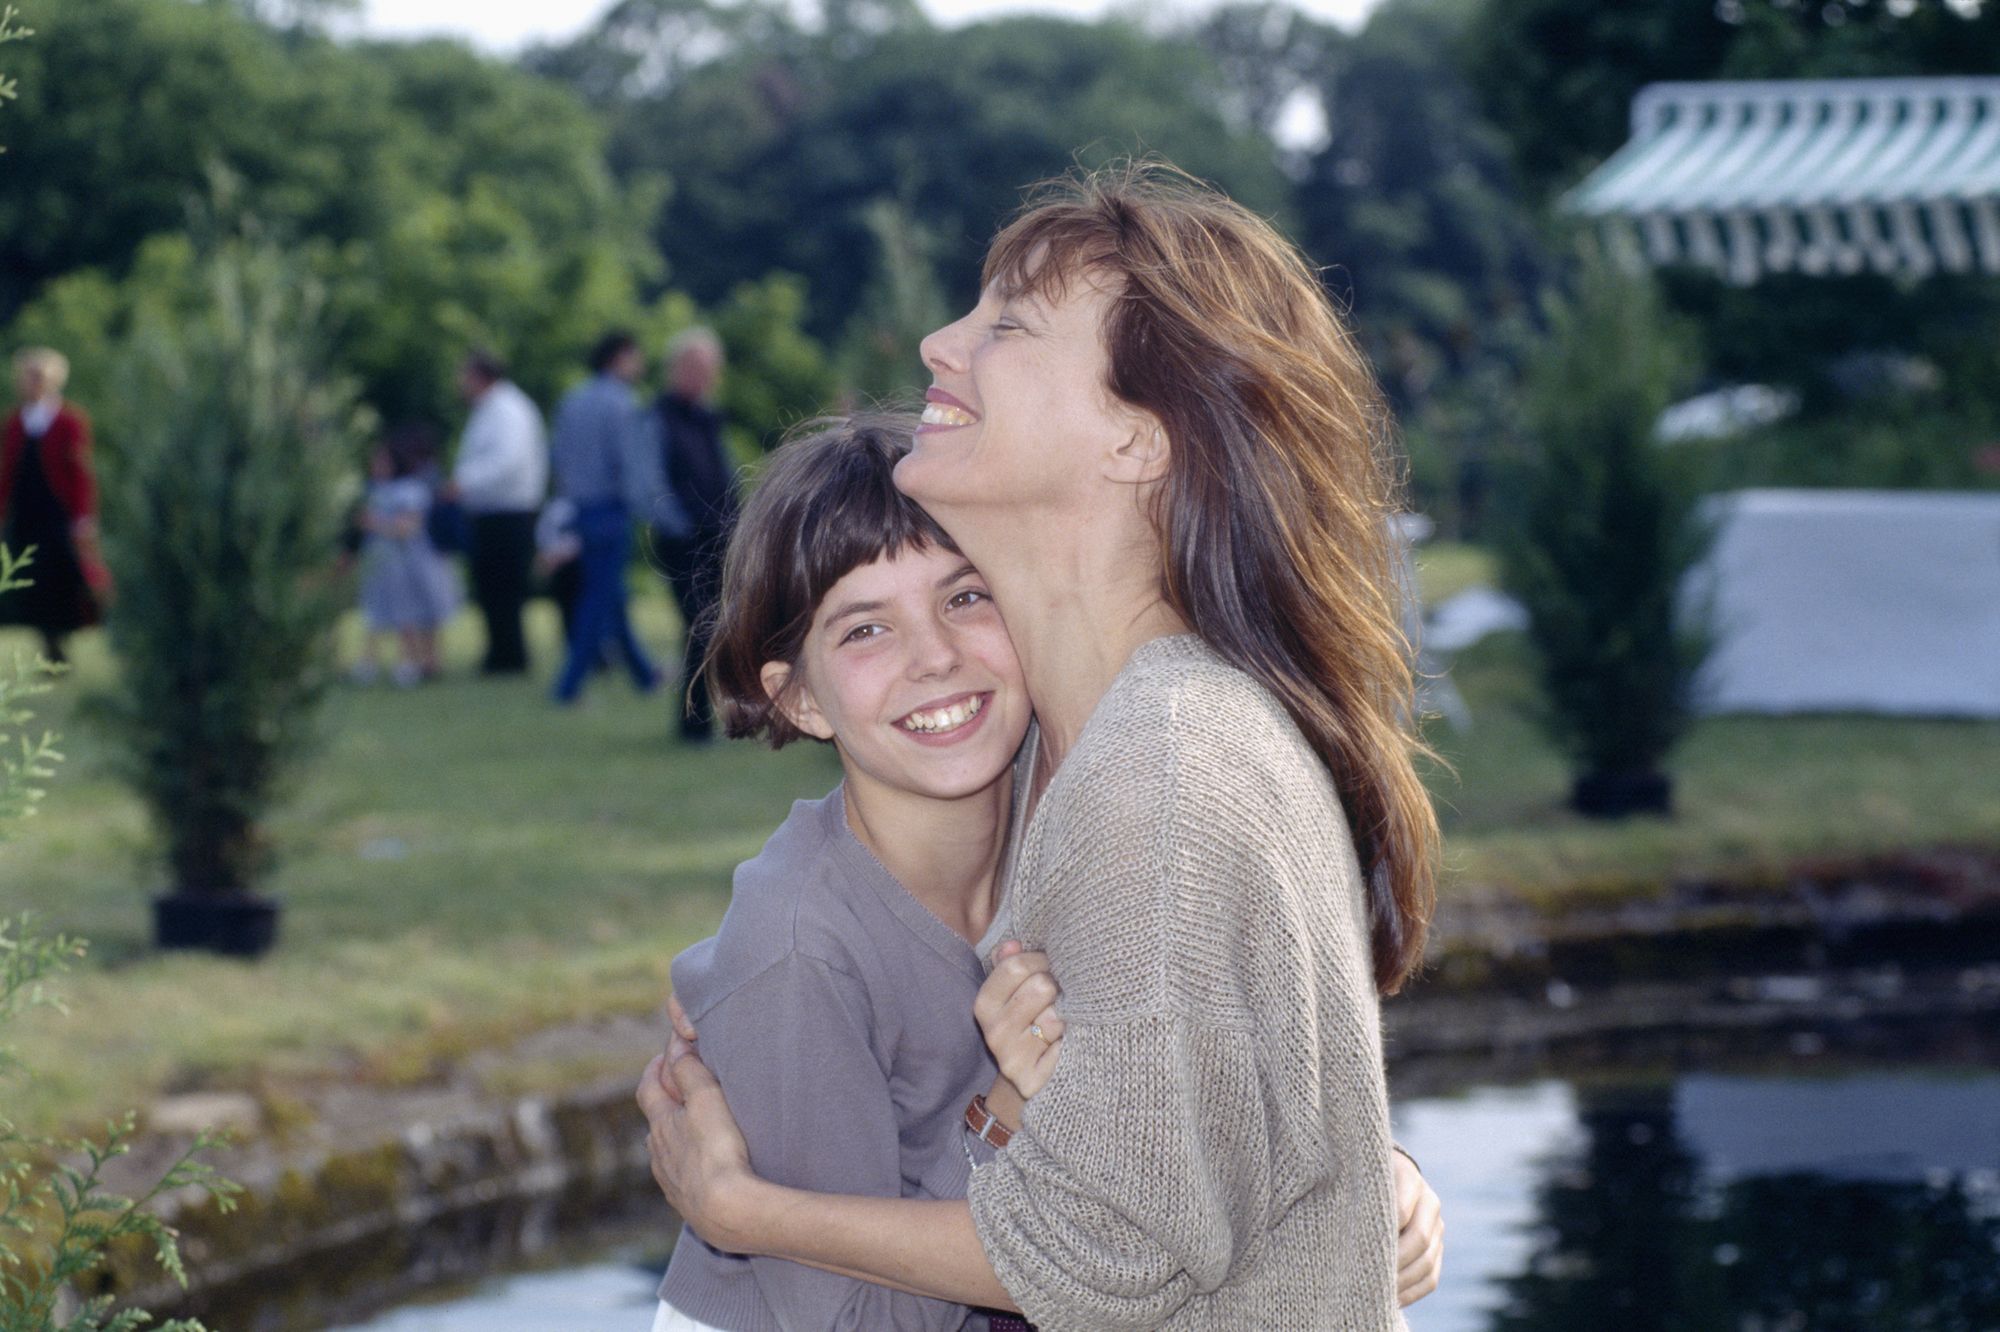 french actress lou doillon with her mother, british actress and singer jane birkin, on the set of the film les cent et une nuits de simon cinema, a hundred and one nights of simon cinema, directed by french director agnes varda photo by eric robertsygmasygma via getty images